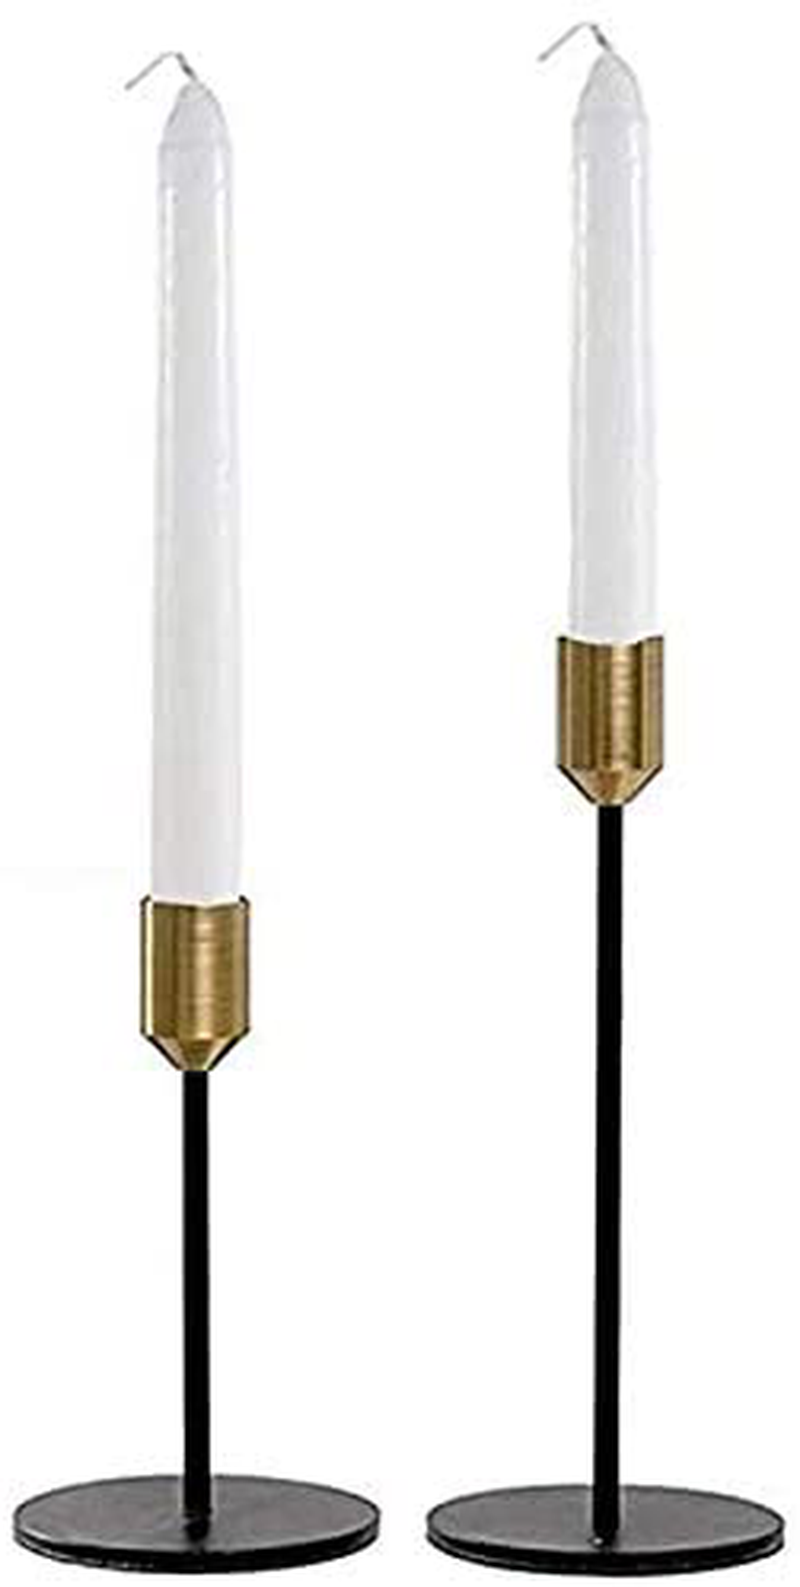 KiaoTime Set of 2 Brass Gold Black Taper Candle Holders Candlestick Holders Centerpiece Decorative Vintage & Modern Candlelight Dinner Metal Candlestick Holders for Table Mantel Wedding Housewarming Home & Garden > Decor > Home Fragrance Accessories > Candle Holders KiaoTime Default Title  